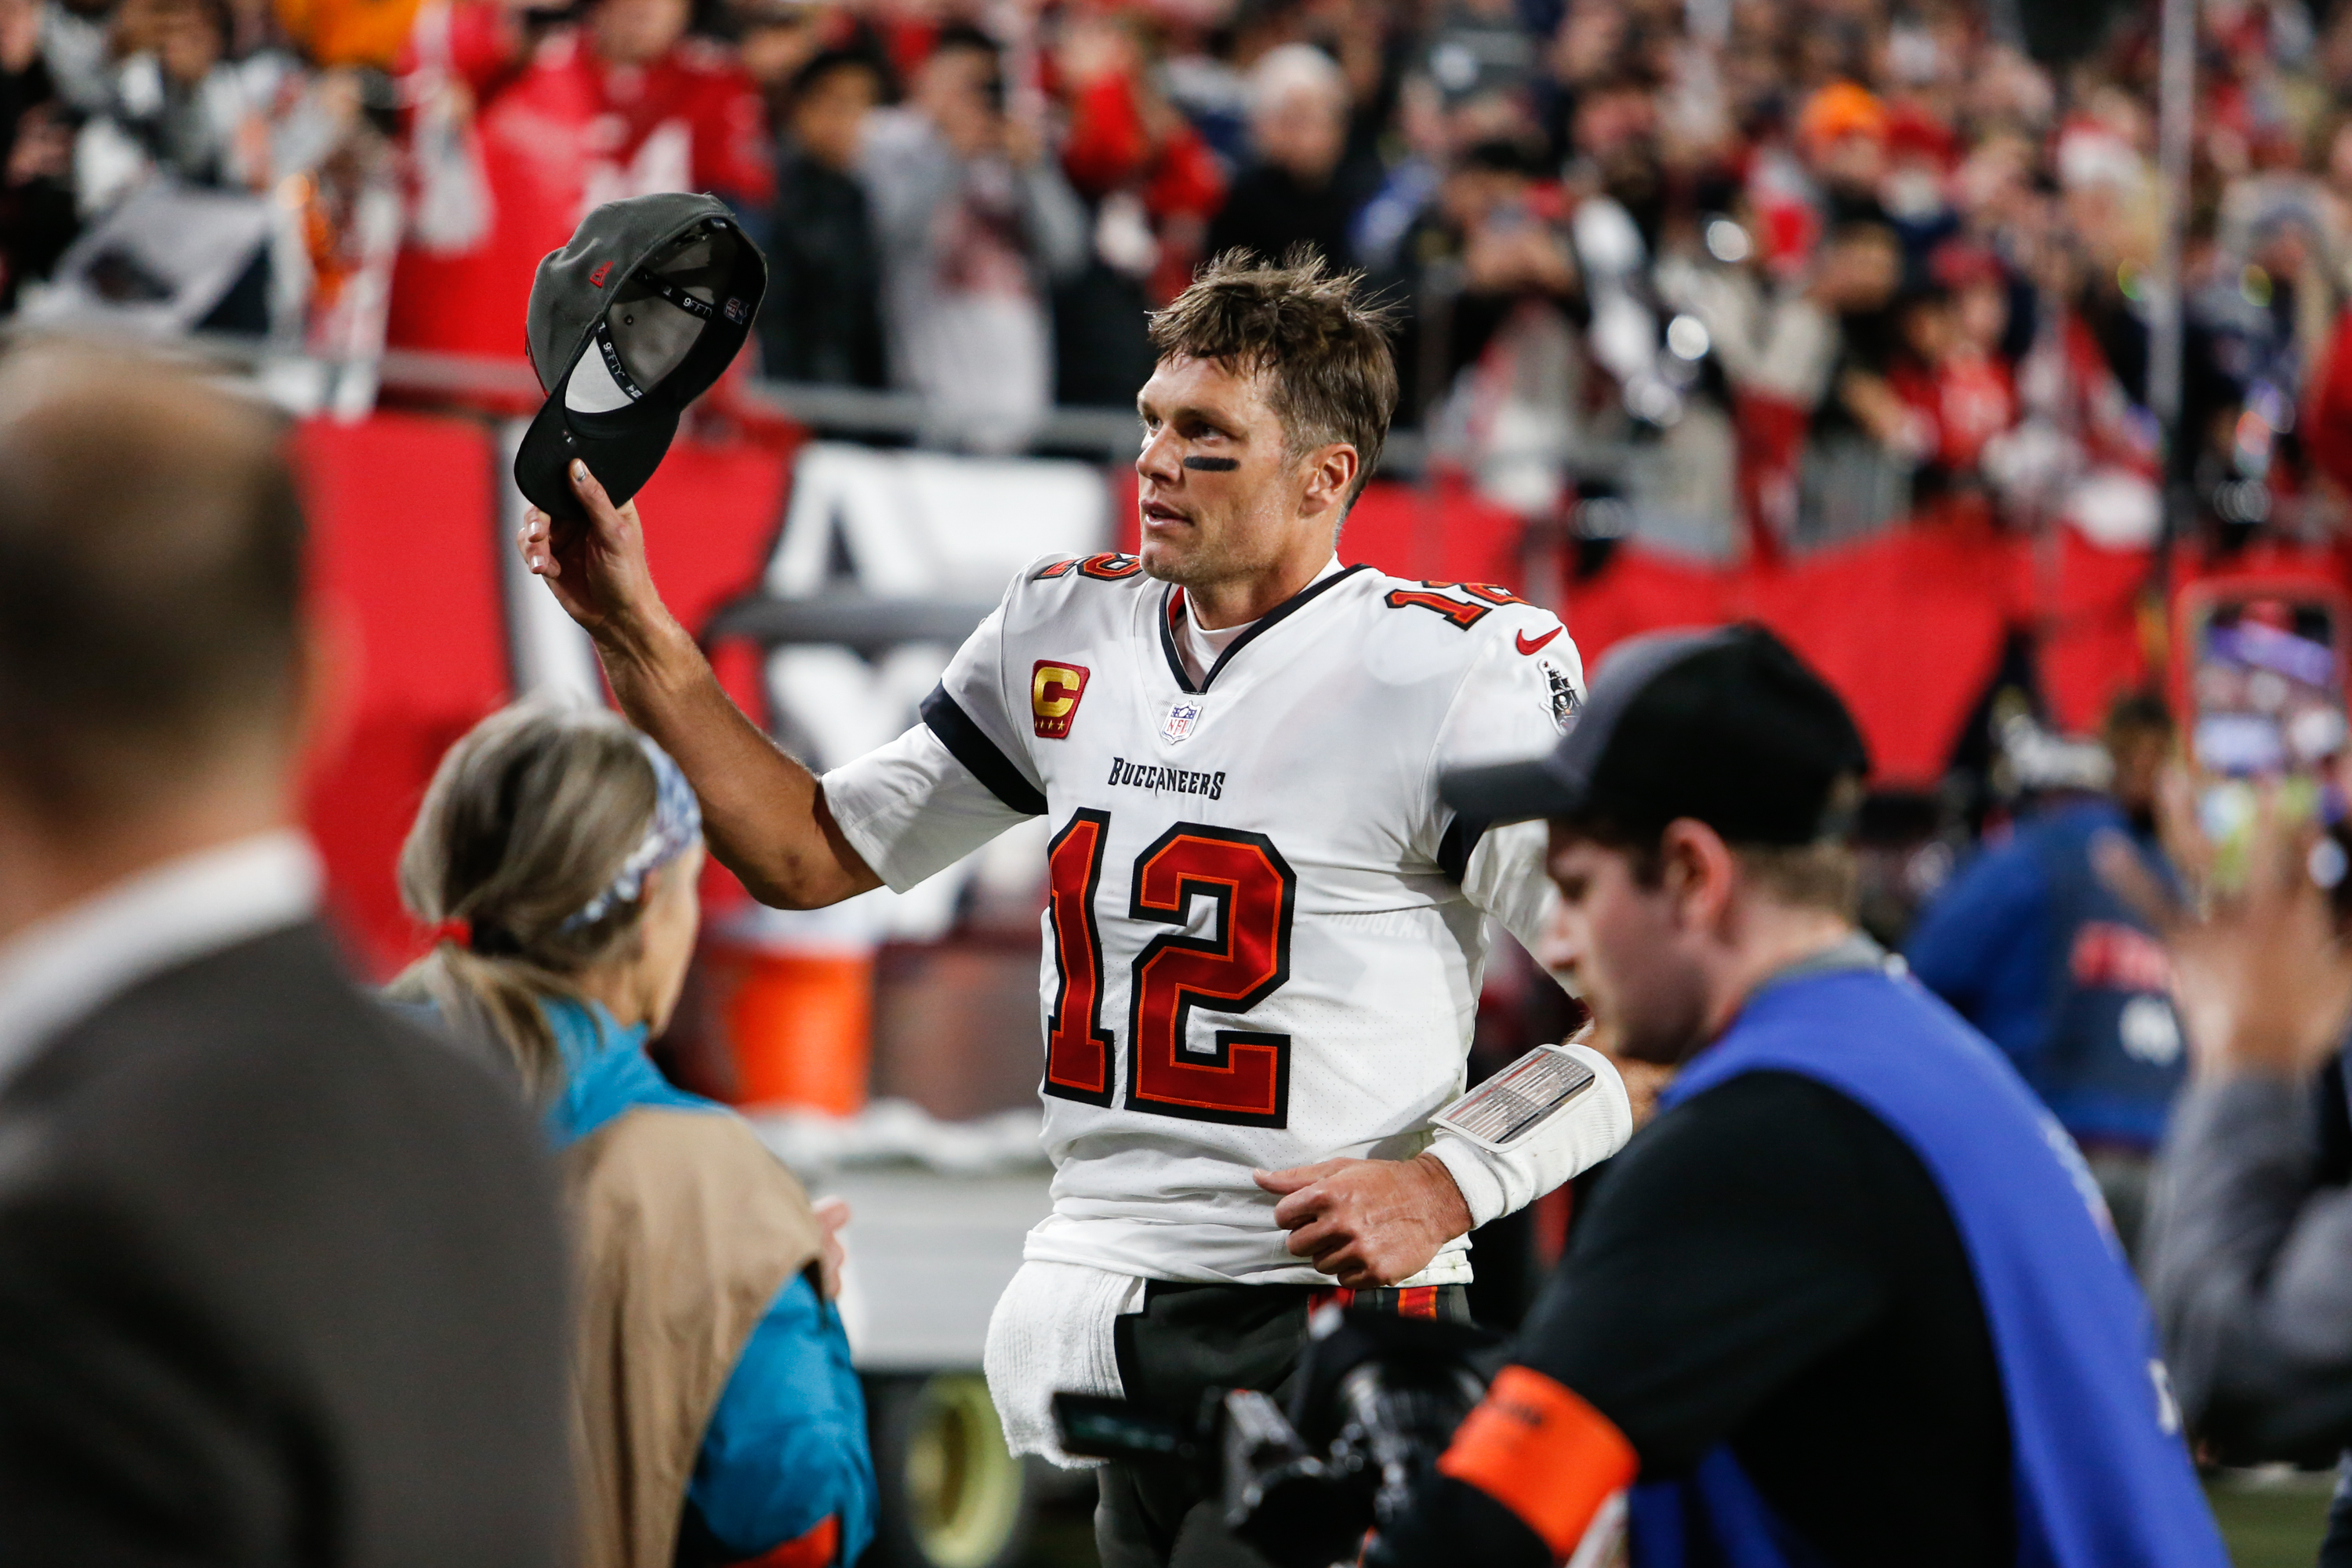 HIGHLIGHTS: Buccaneers Defeated by Dallas Cowboys 31-14 in the